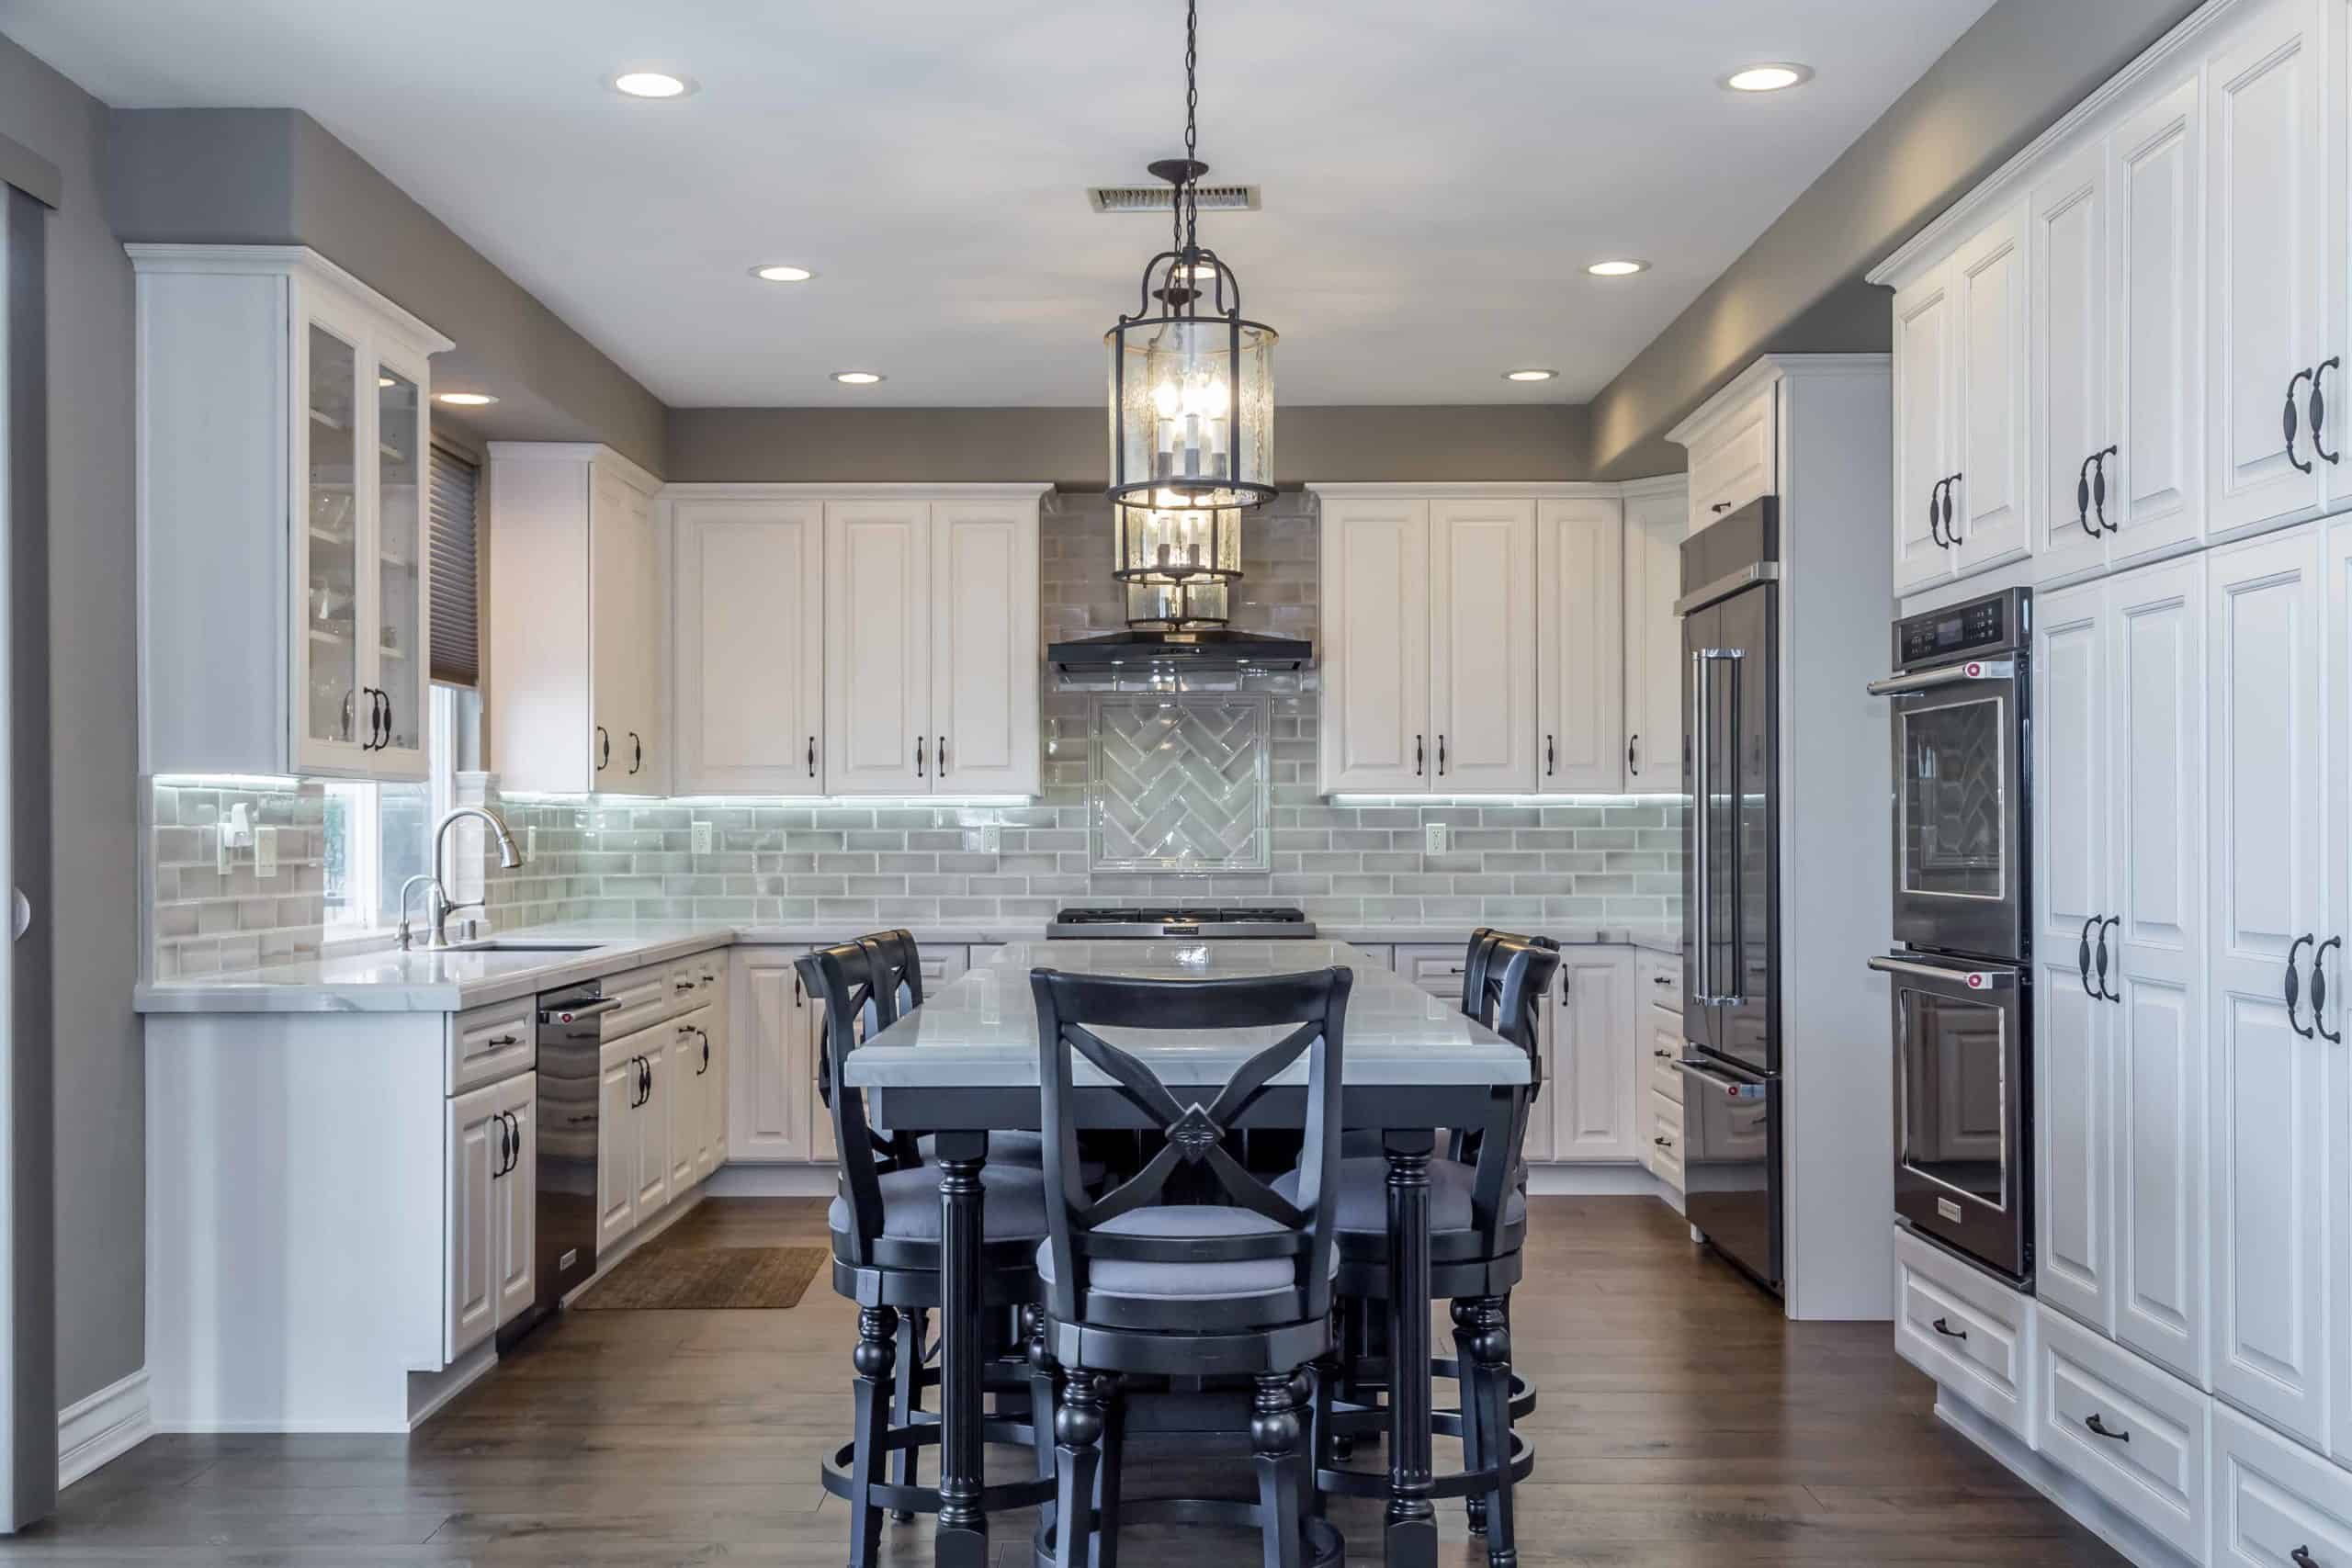 Tips and Tricks for a Light and Dark Themed Kitchen